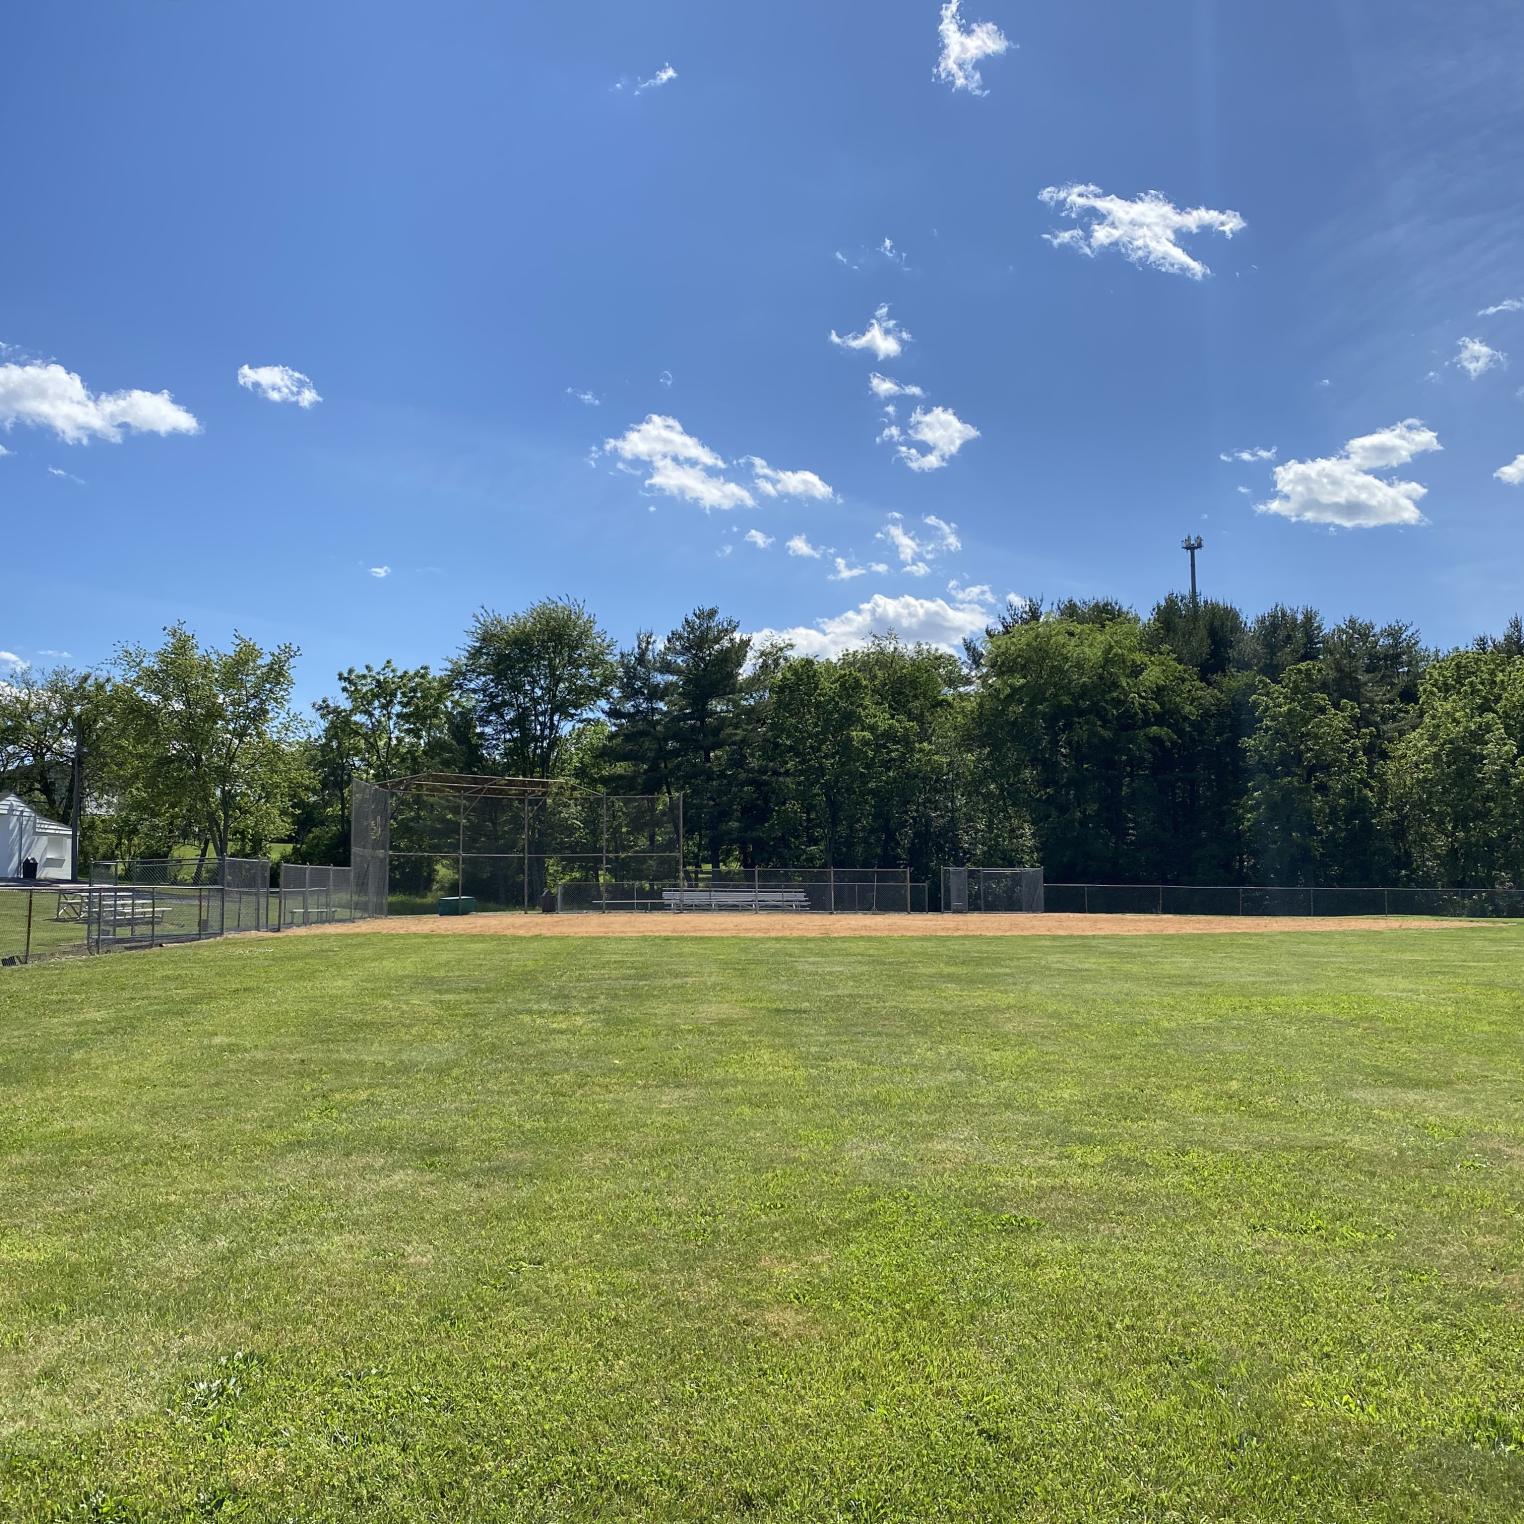 Middlesex Township Park